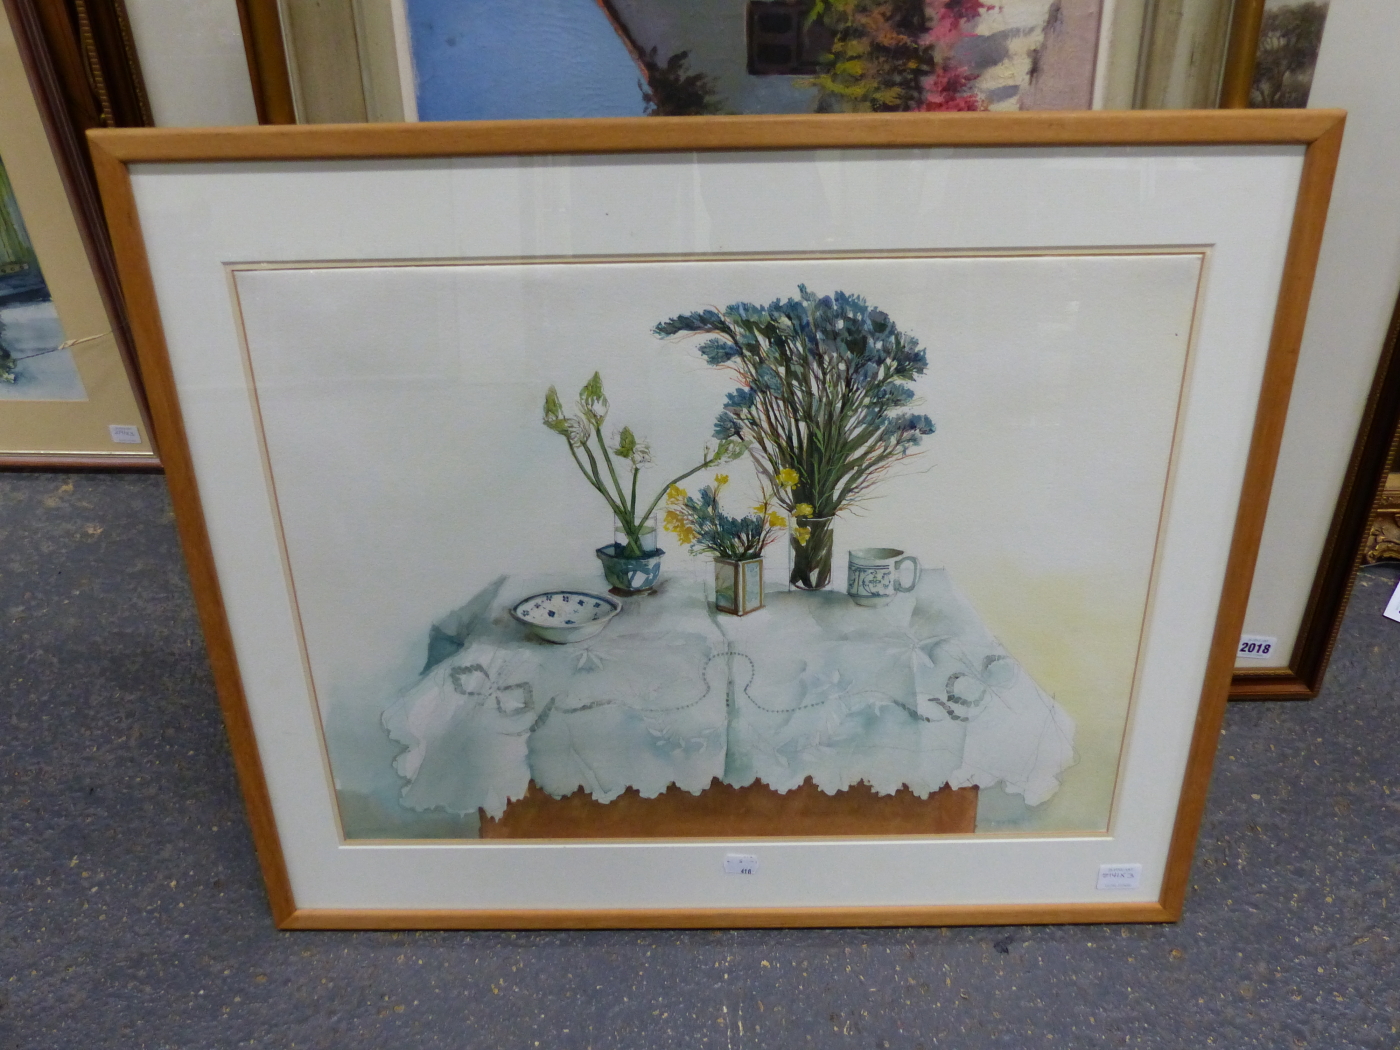 PAM TIPPETT (1950-). ARR. A STILL LIFE STUDY, SIGNED WATERCOLOUR. 36.5 x 27cms TOGETHER WITH TWO - Image 8 of 8